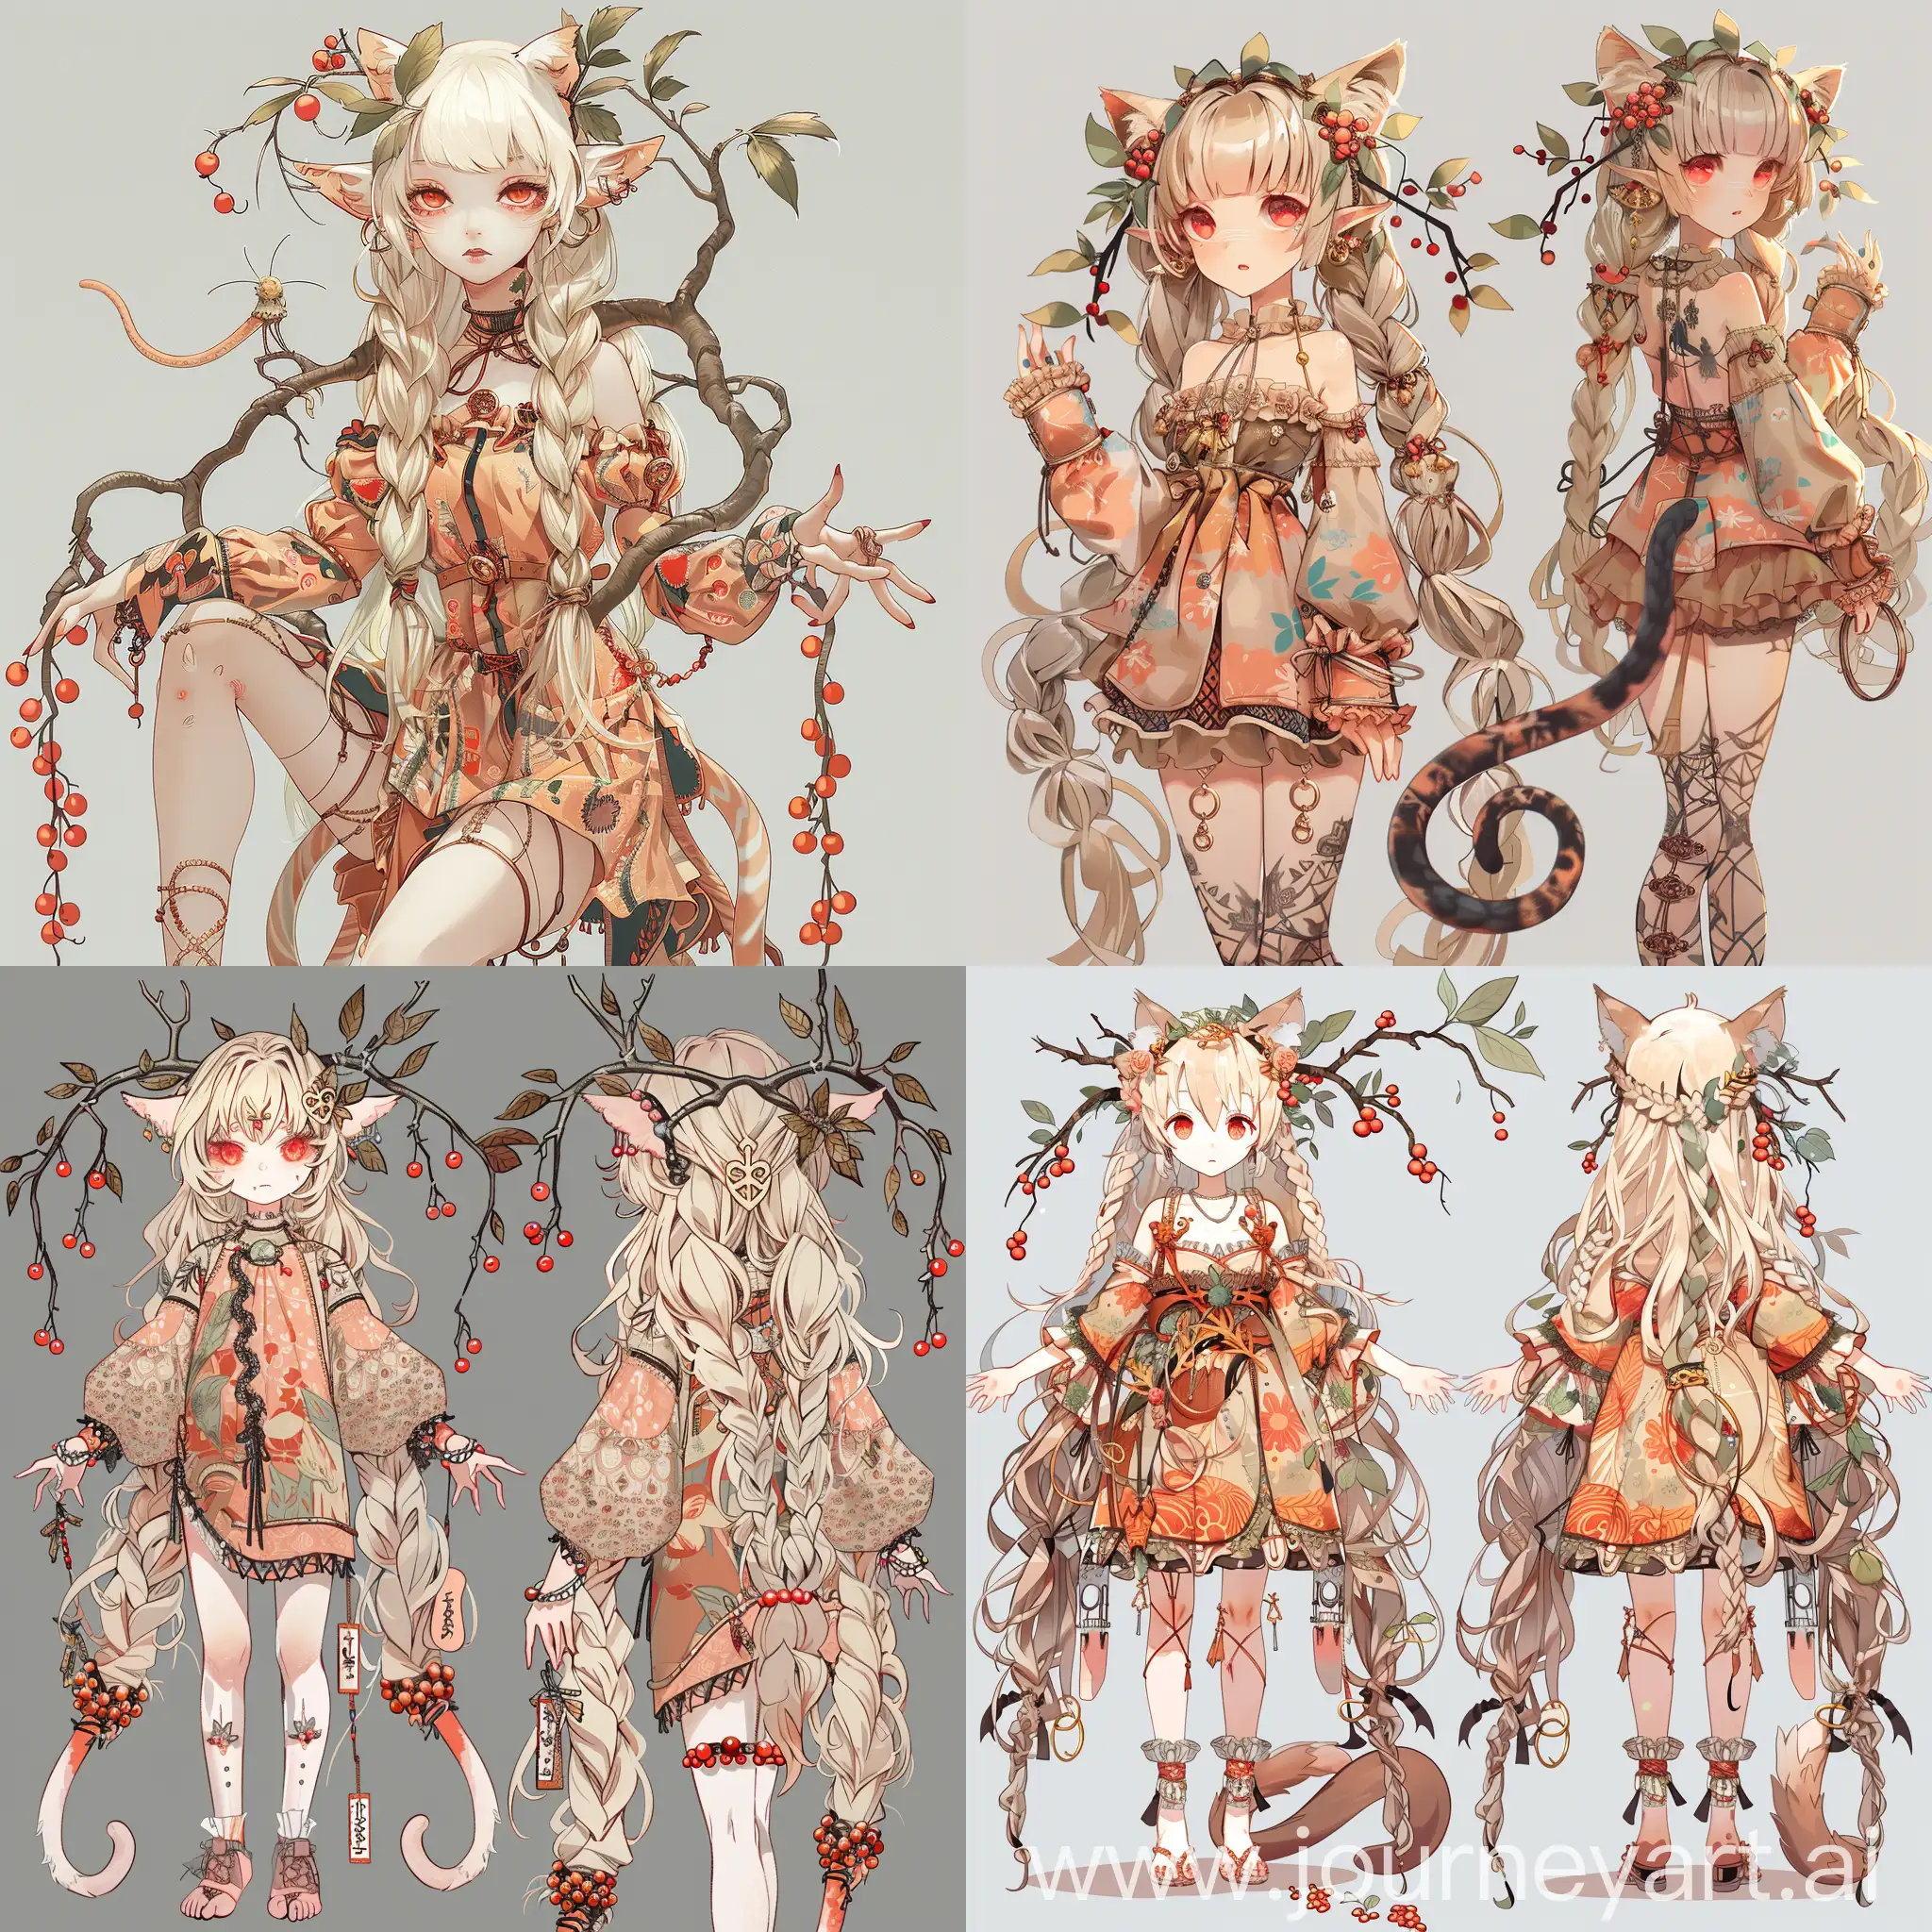 Albino-Anime-Girl-with-Catlike-Features-and-Natureinspired-Accessories